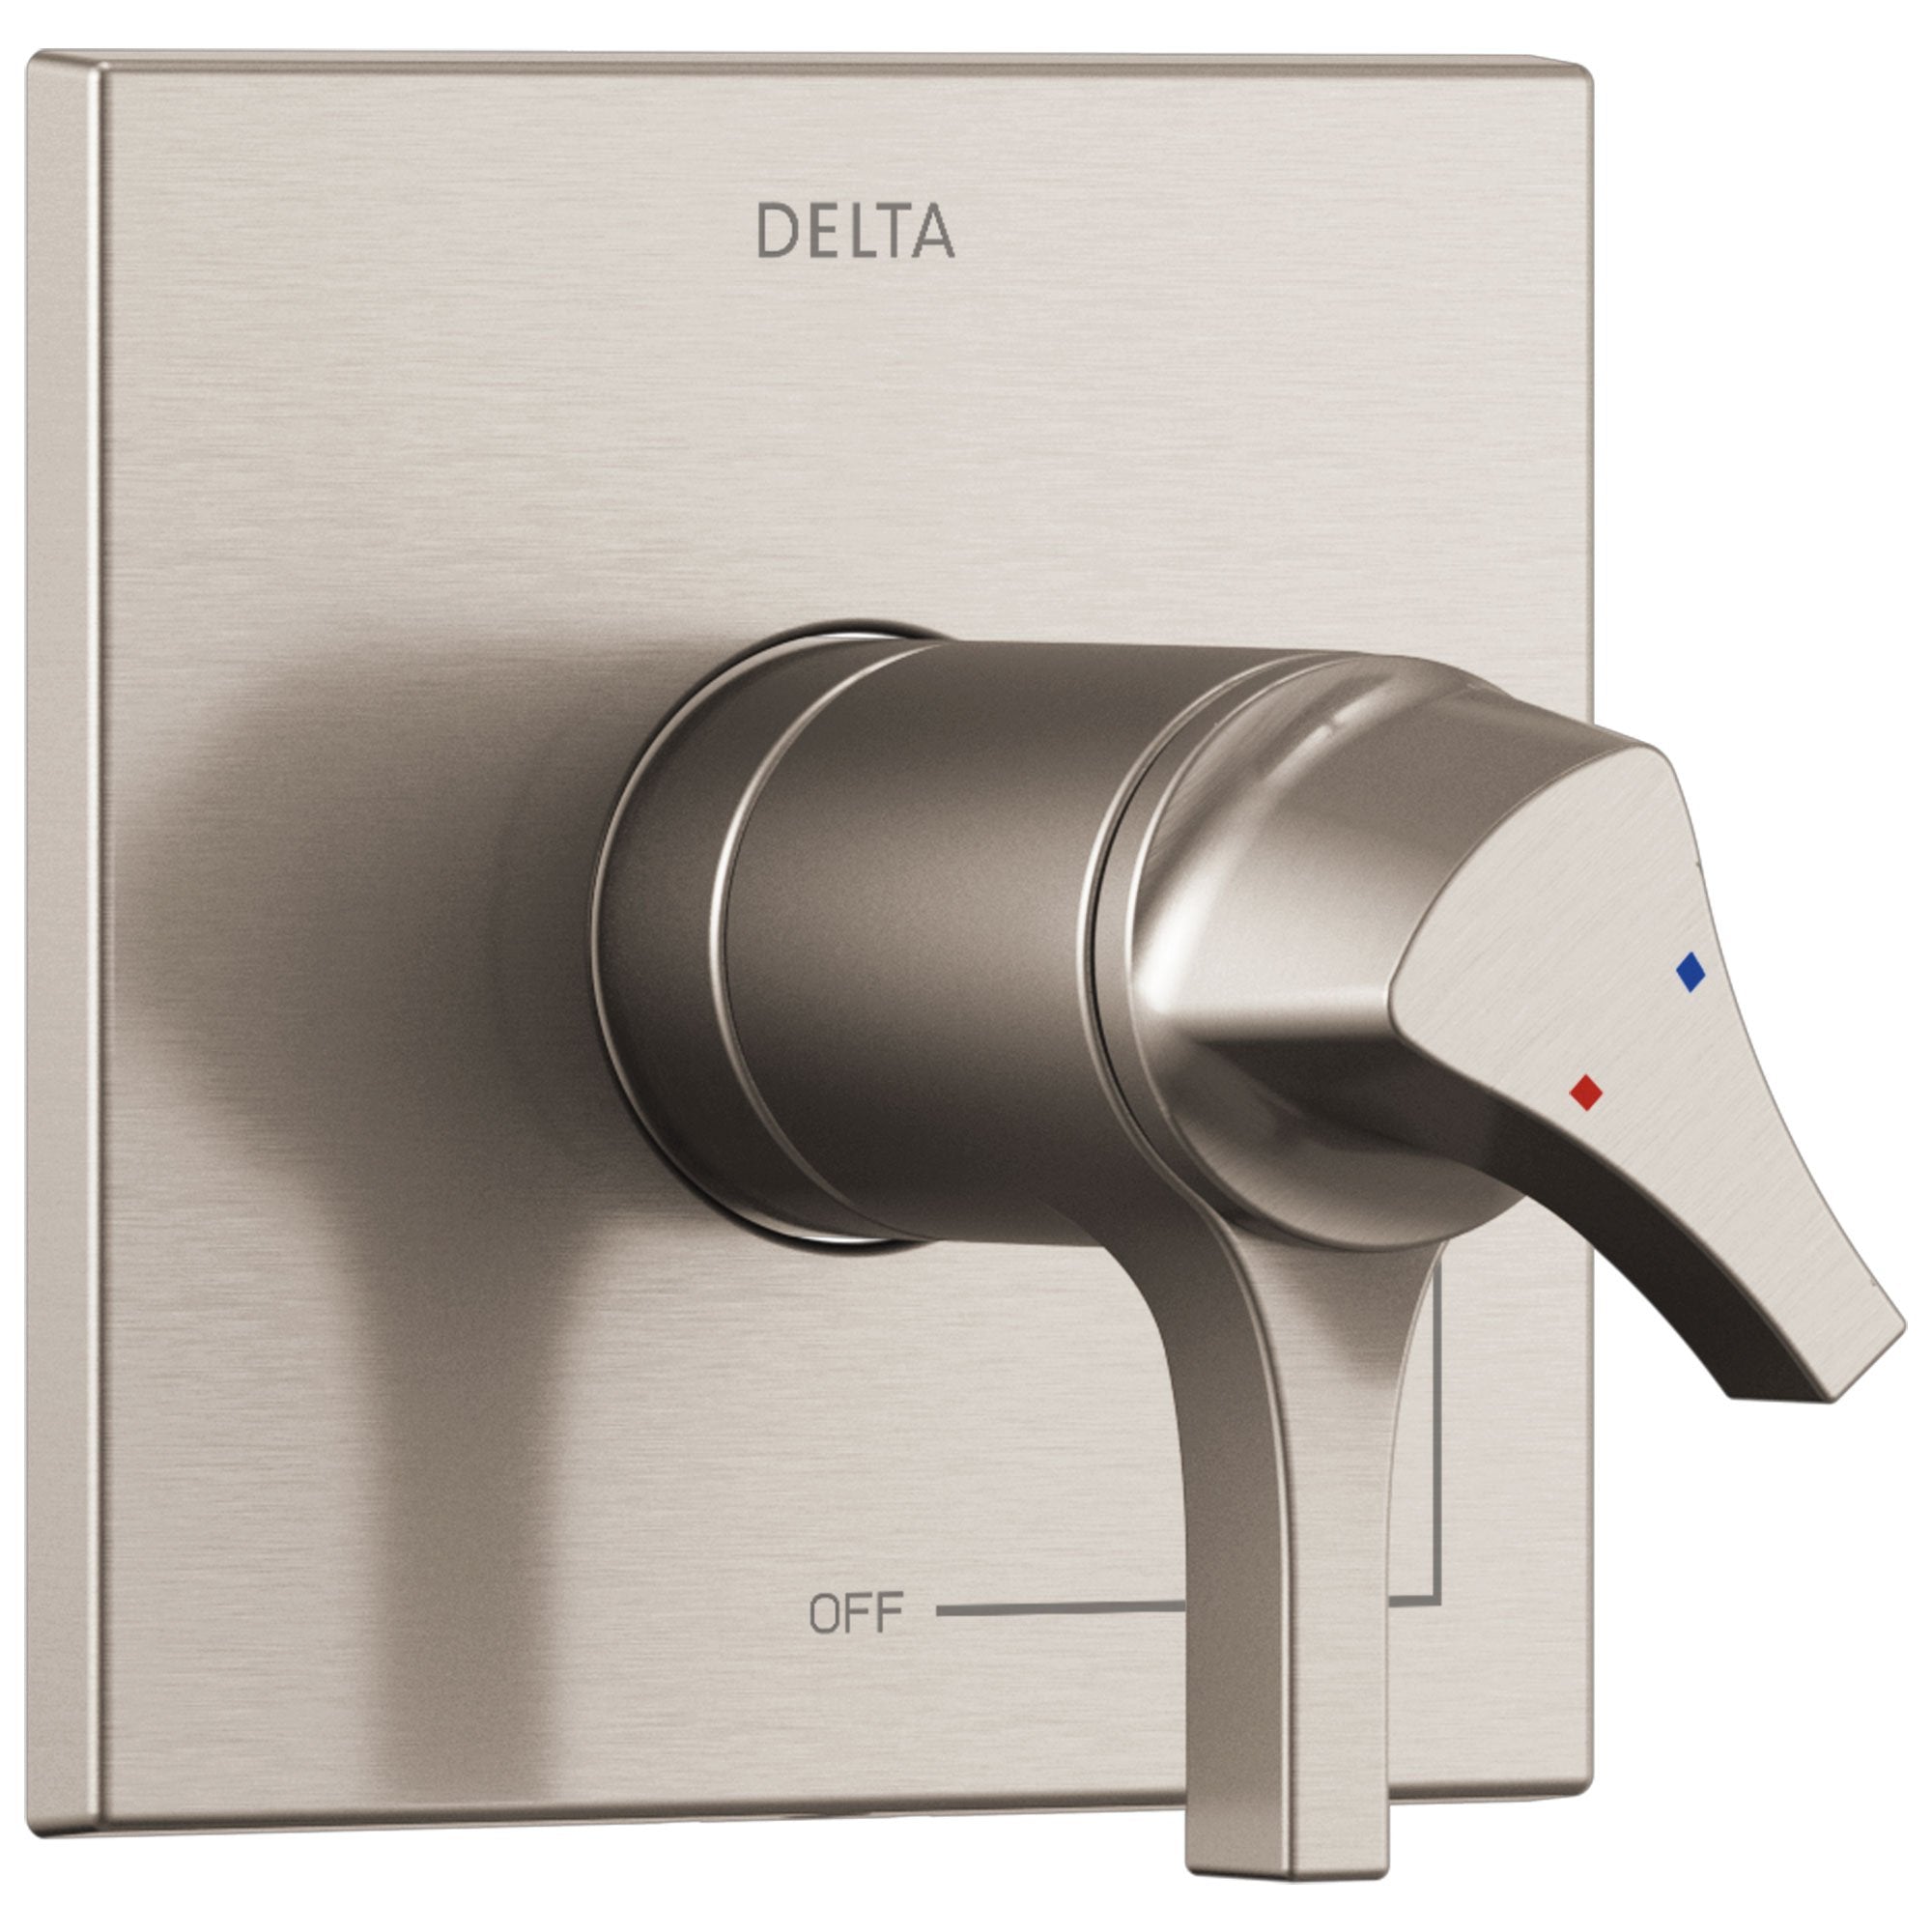 Delta Zura Collection Stainless Steel Finish TempAssure 17T Dual Temperature and Pressure Shower Faucet Control Handle Includes Valve without Stops D1942V